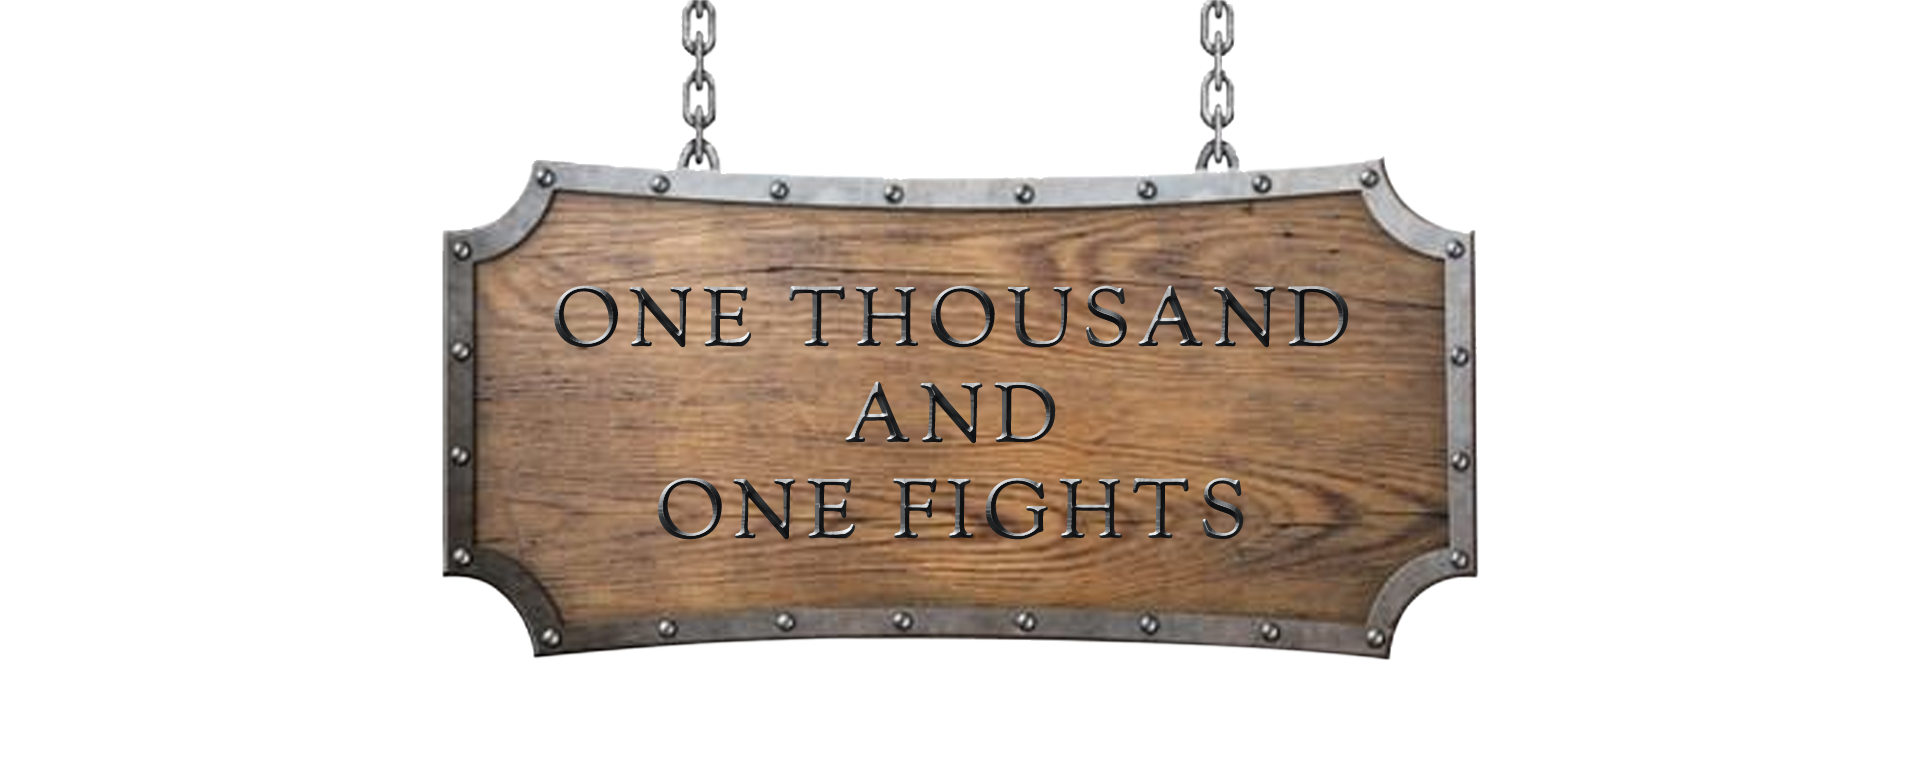 One Thousand and One Fights